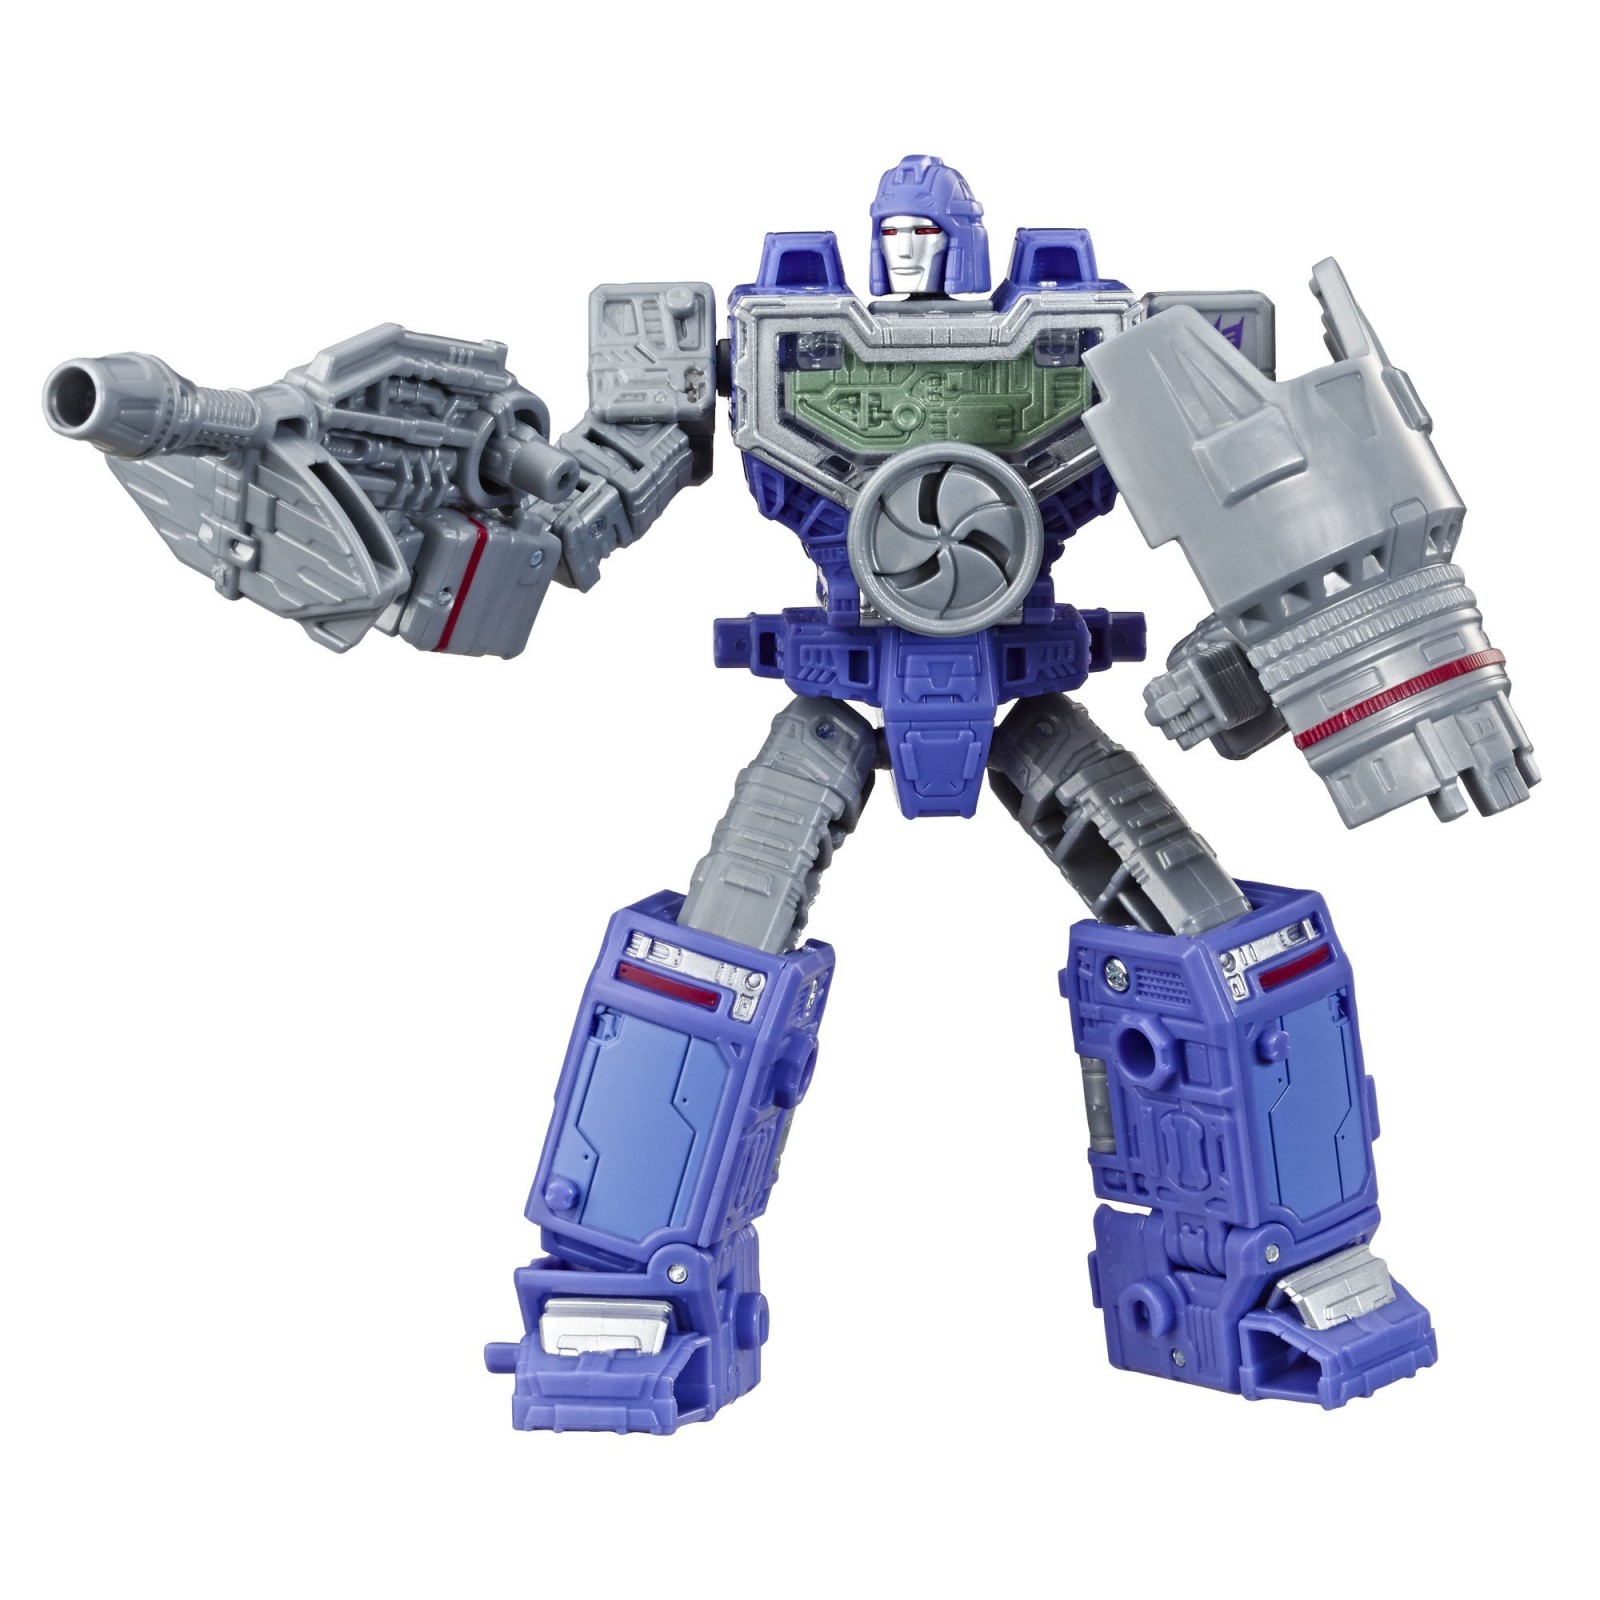 Transformers News: SIEGE Refraktor and Red Alert in stock with immediate shipping at Walmart.com